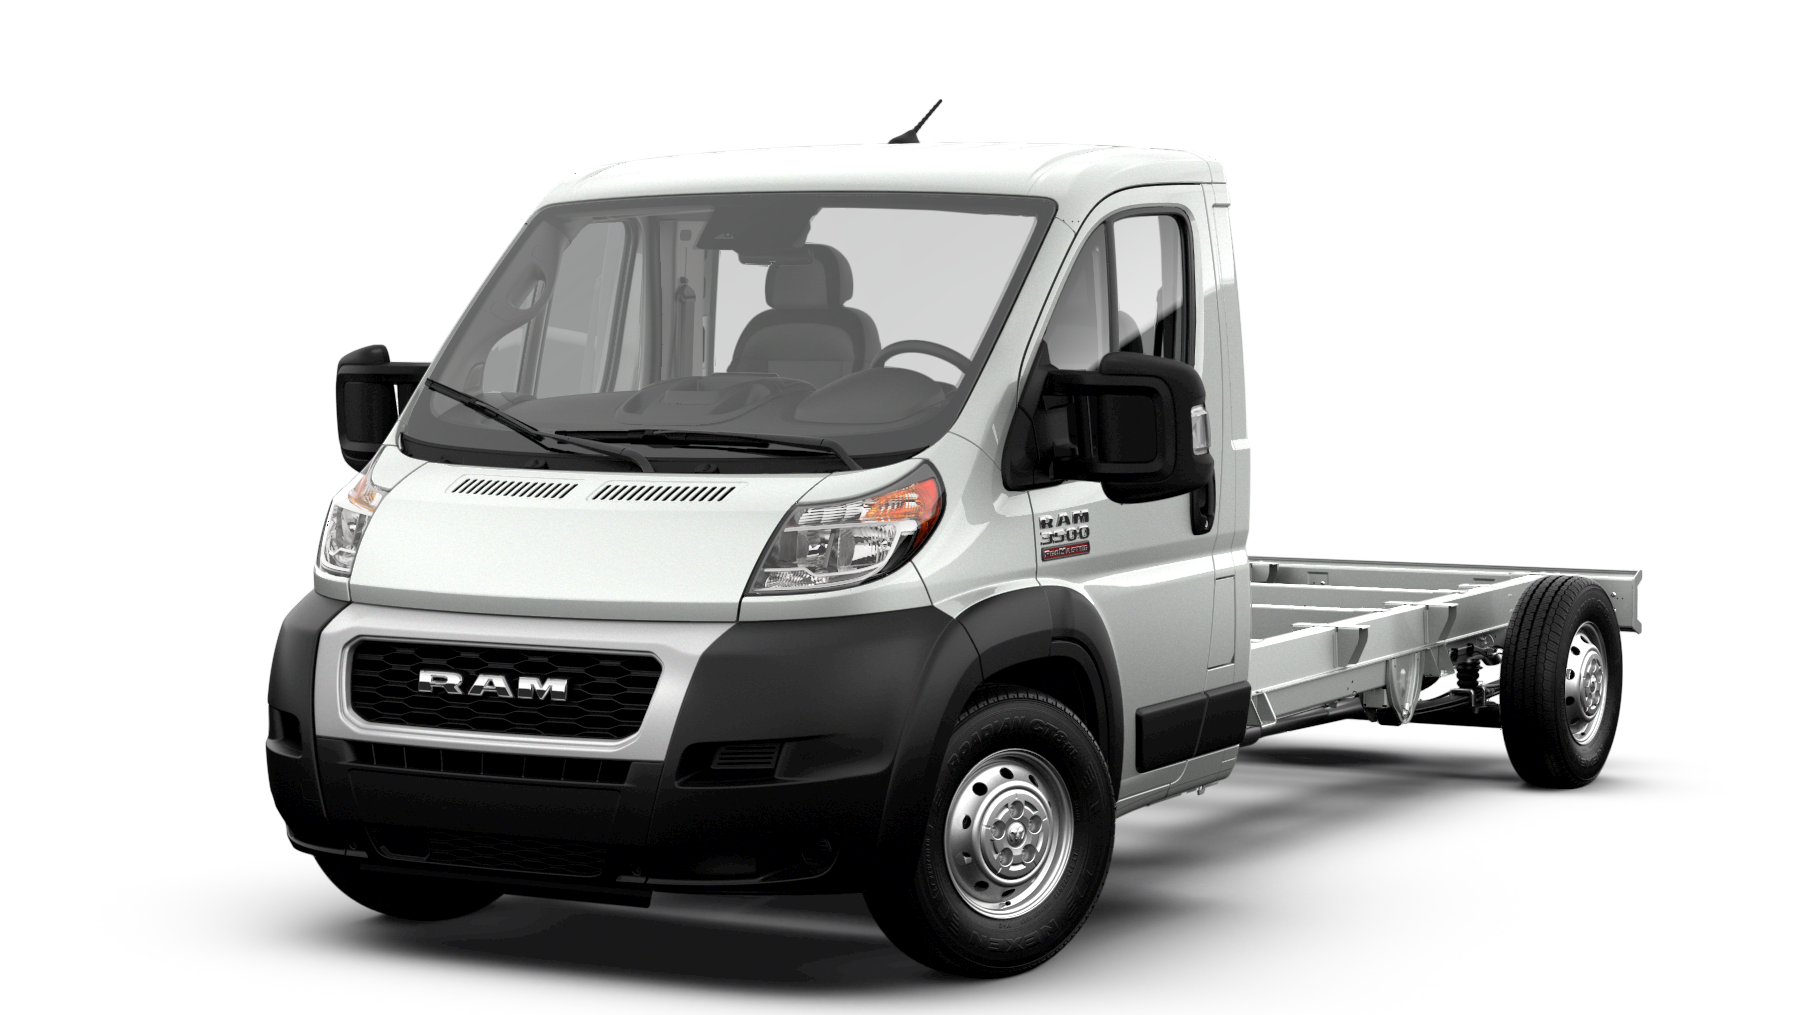 New 2022 RAM ProMaster Low Roof 2WD Light Duty Chassis-Cab Trucks in McKees  Rocks #22BR03037 | Diehl CDJR of Robinson